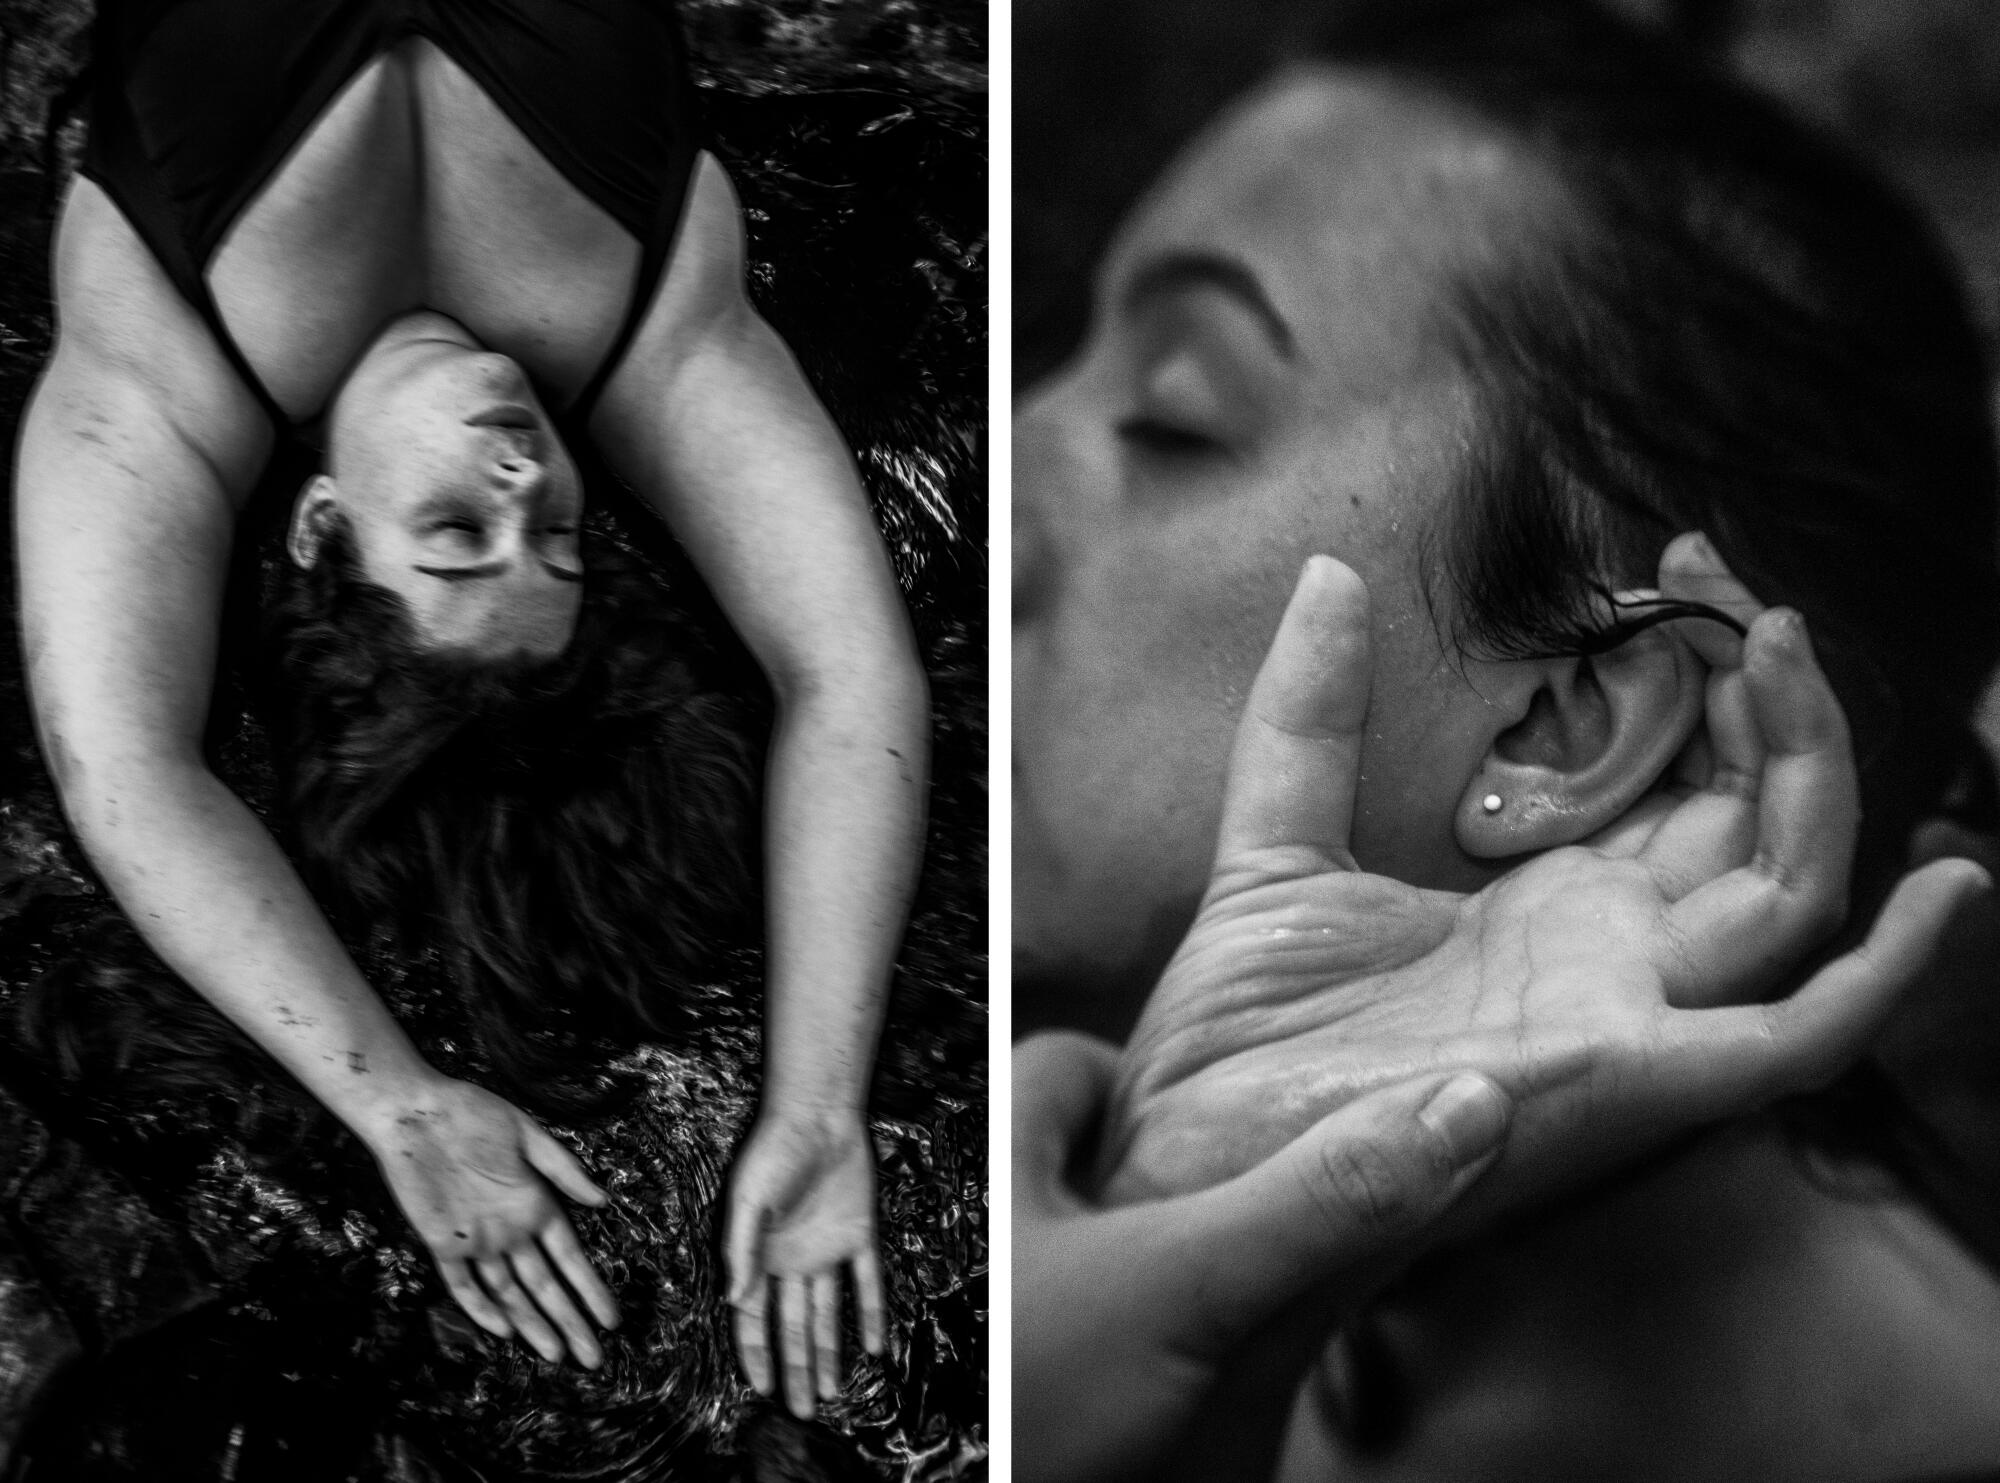 A diptych of two photos. On left, a woman lies in a stream of water. On right, a woman cups her ear.